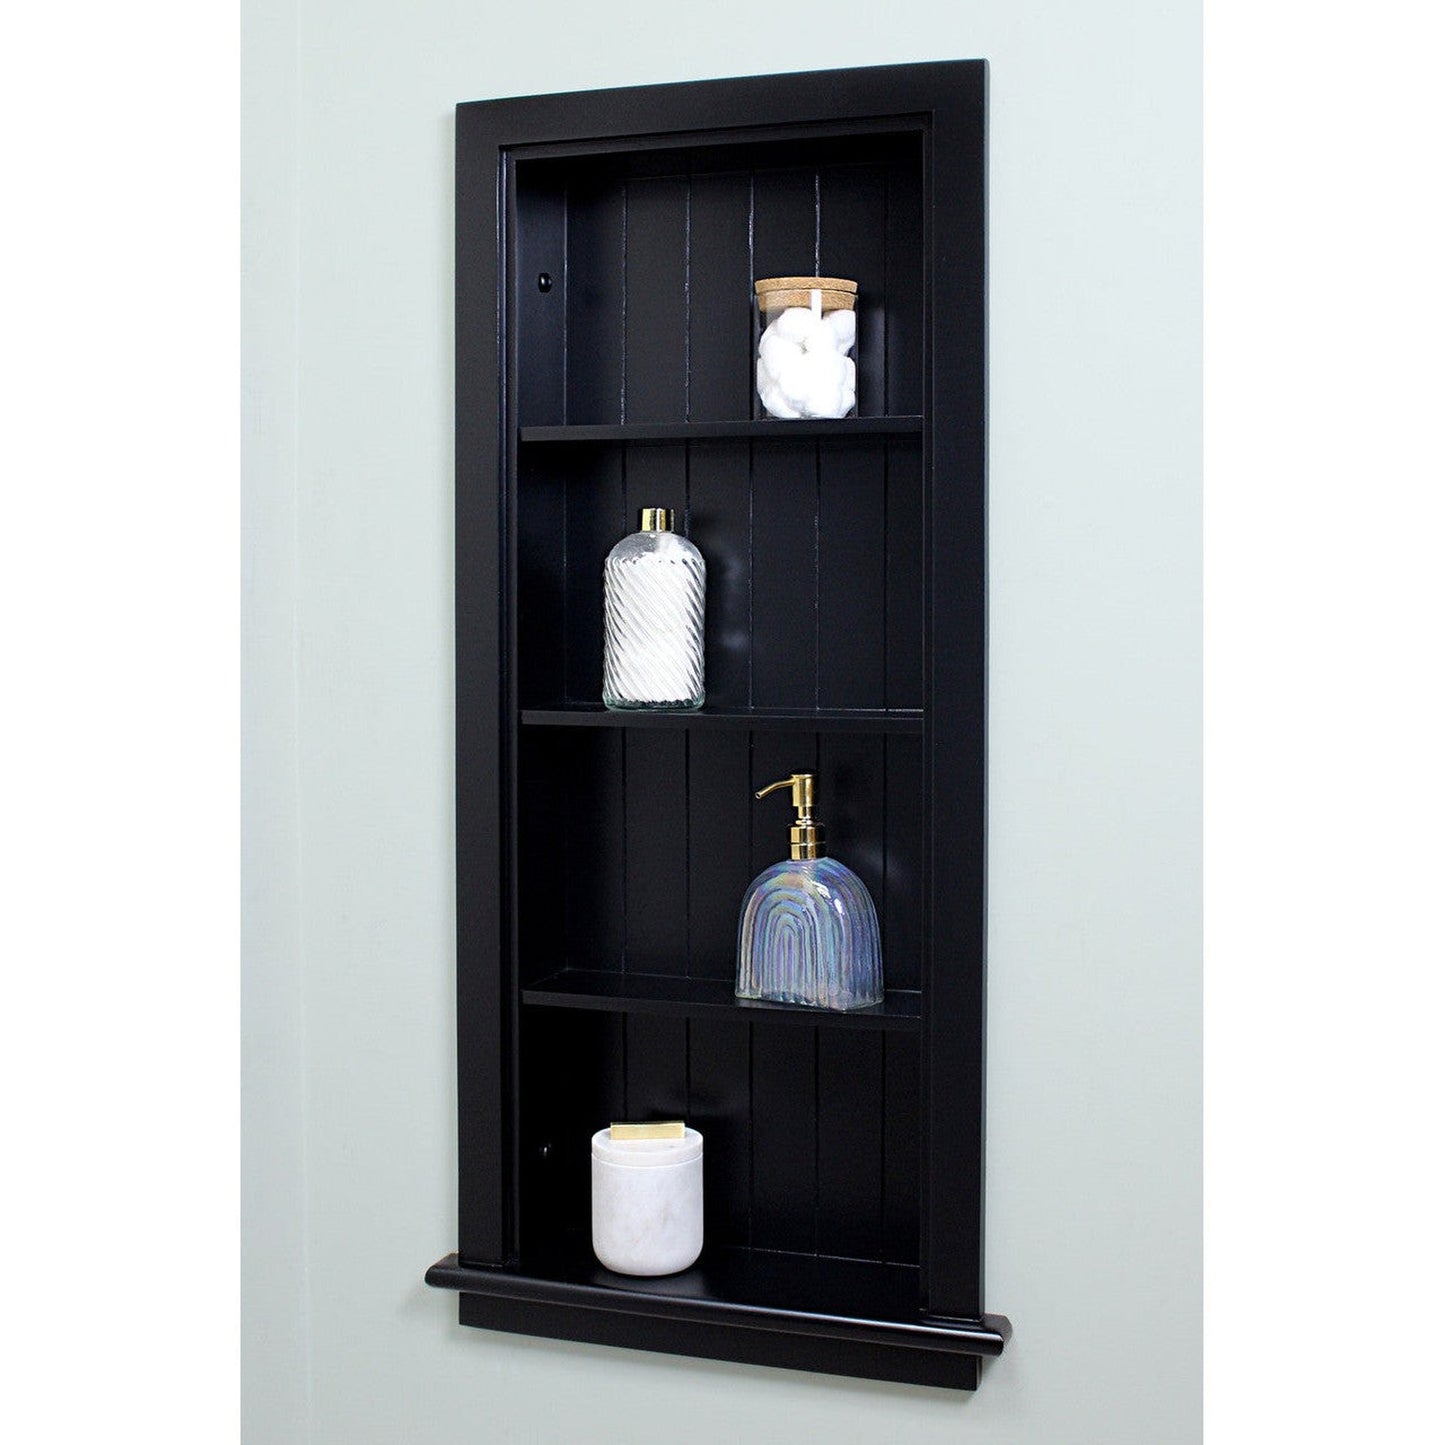 Fox Hollow Furnishings 14" x 36" Black Recessed Wall Niche With Beadboard Back and Three Shelves